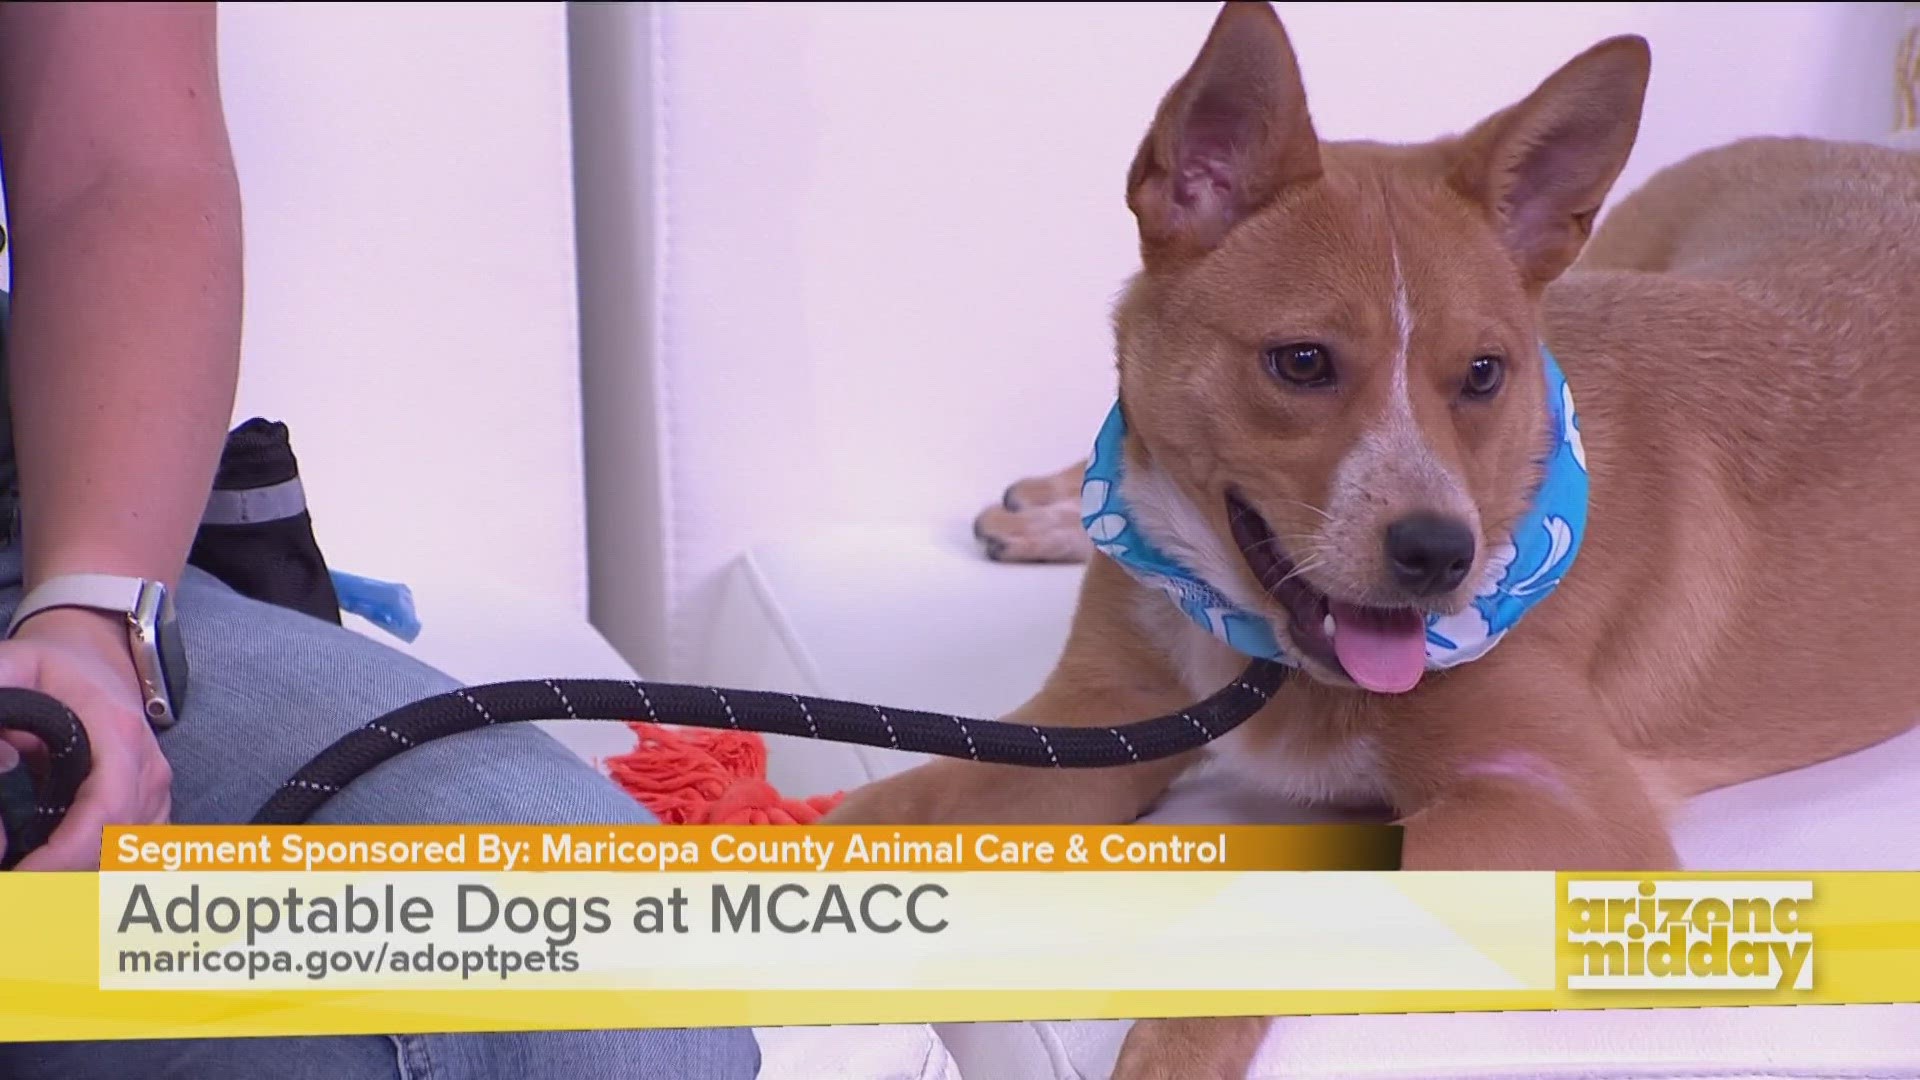 Kim Powell with Maricopa County Animal Care & Control introduces us to June and tells us how you can take her and other dogs home this summer.